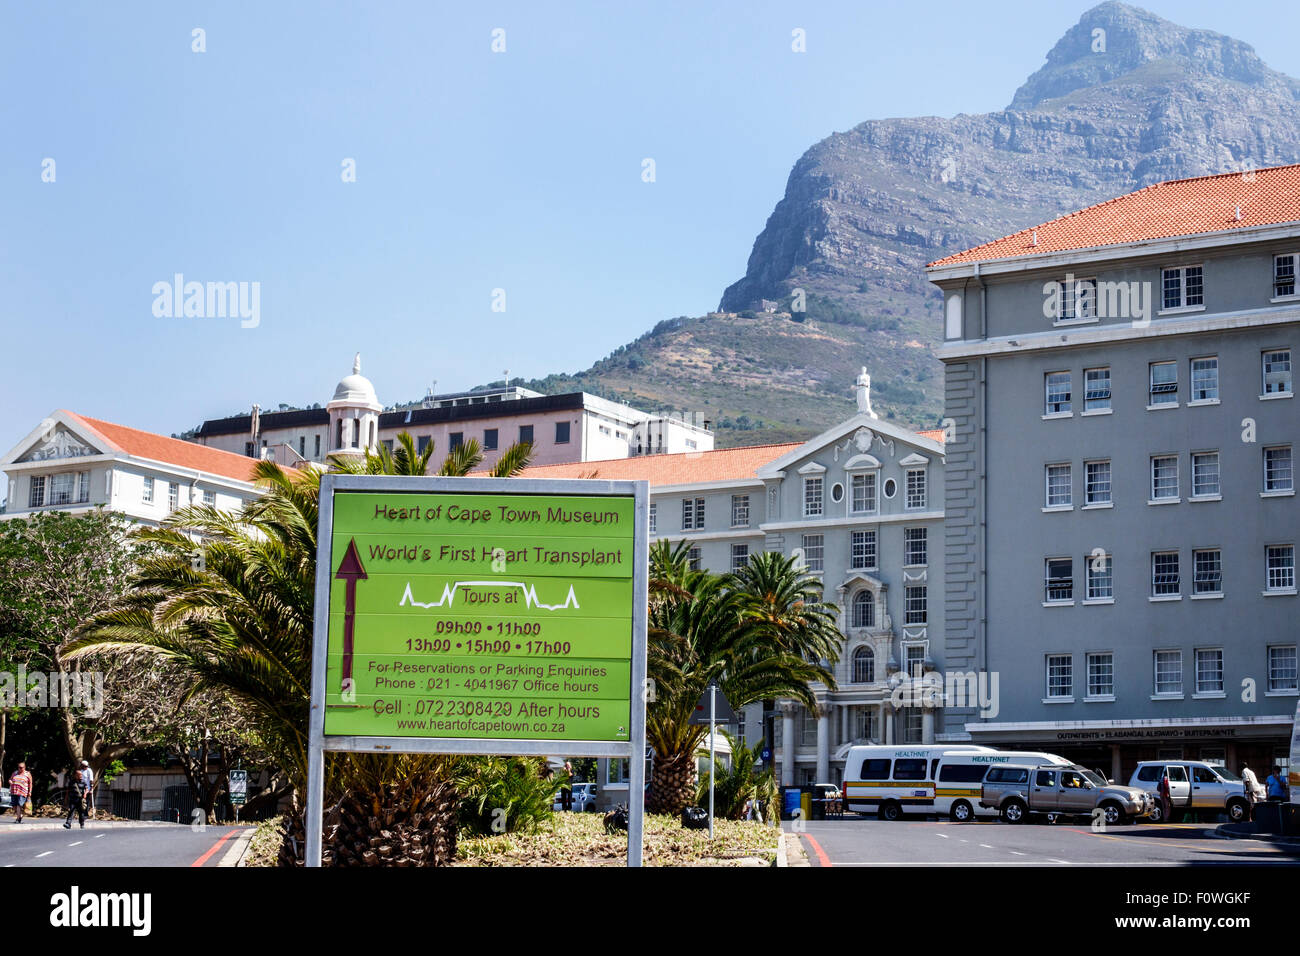 Cape Town South Africa,Salt River,Groote Schuur Hospital,Heart of Cape Town Museum,Table Mountain National Park,SAfri150311025 Stock Photo